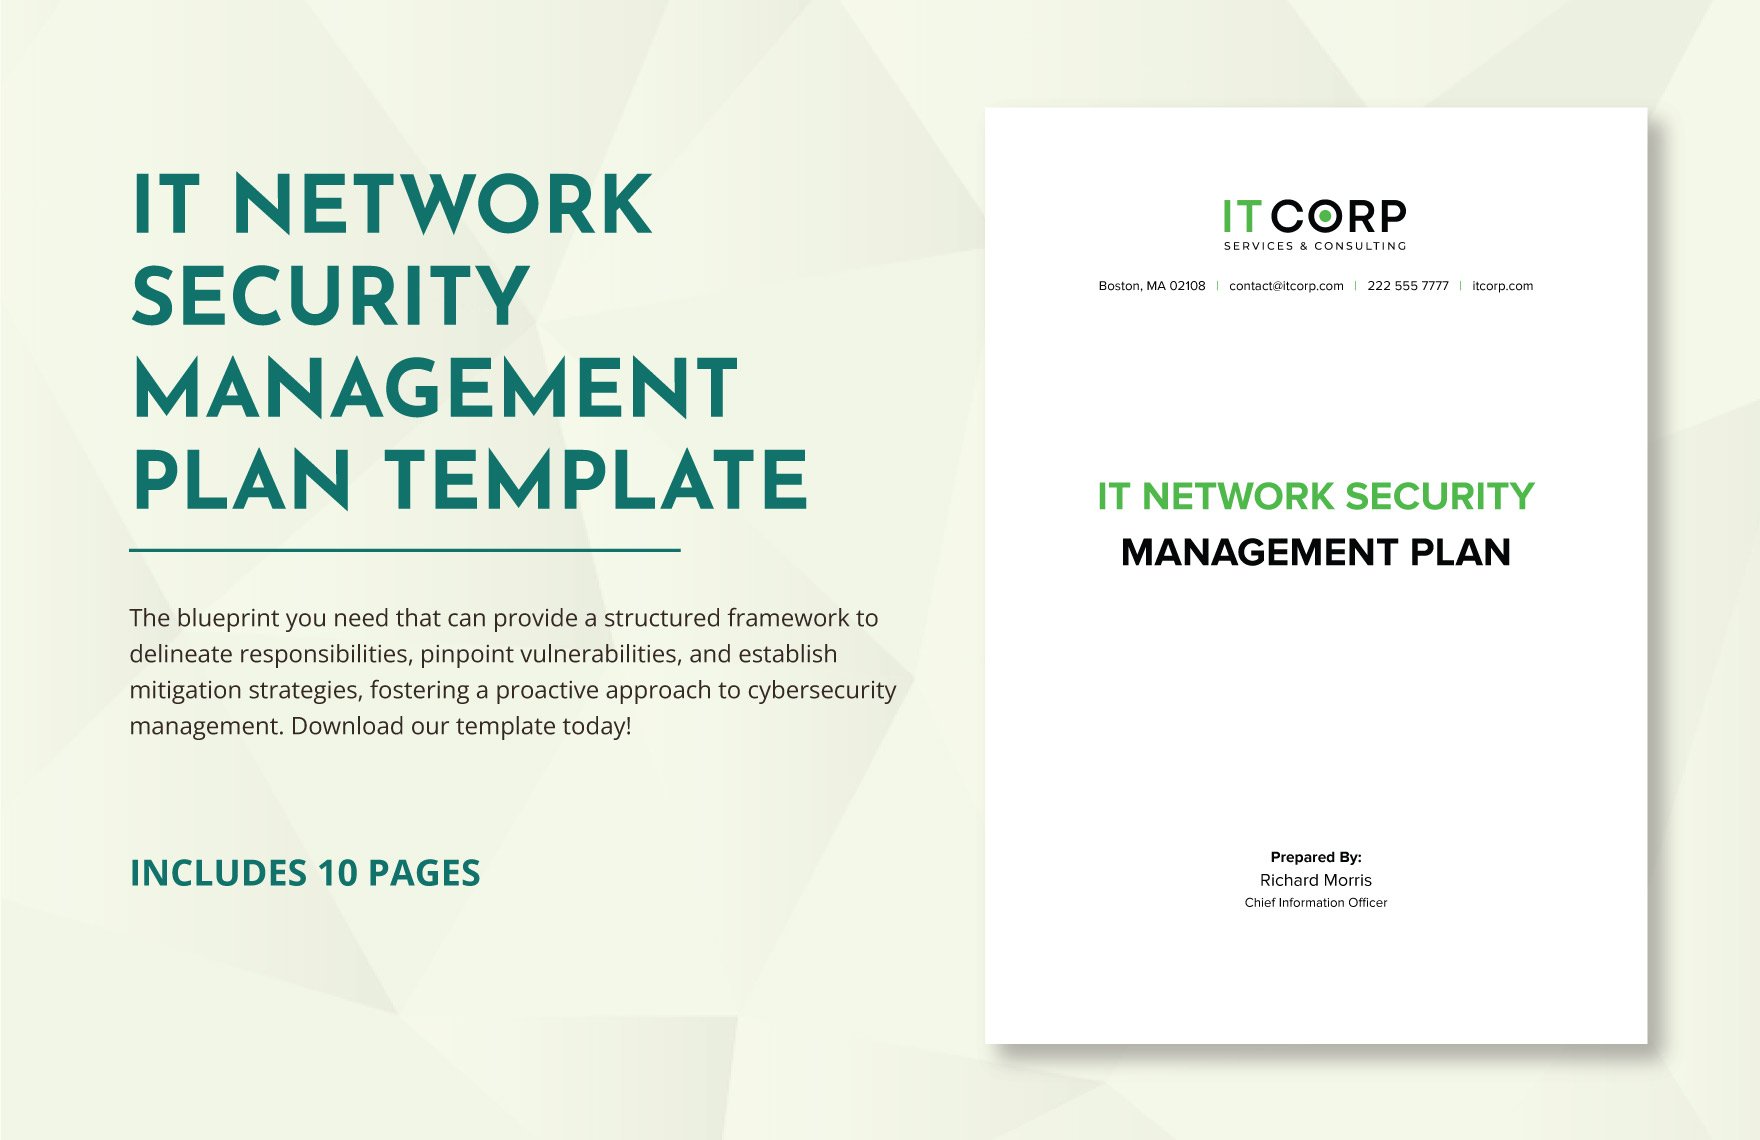 IT Network Security Management Plan Template in Word, Google Docs, PDF